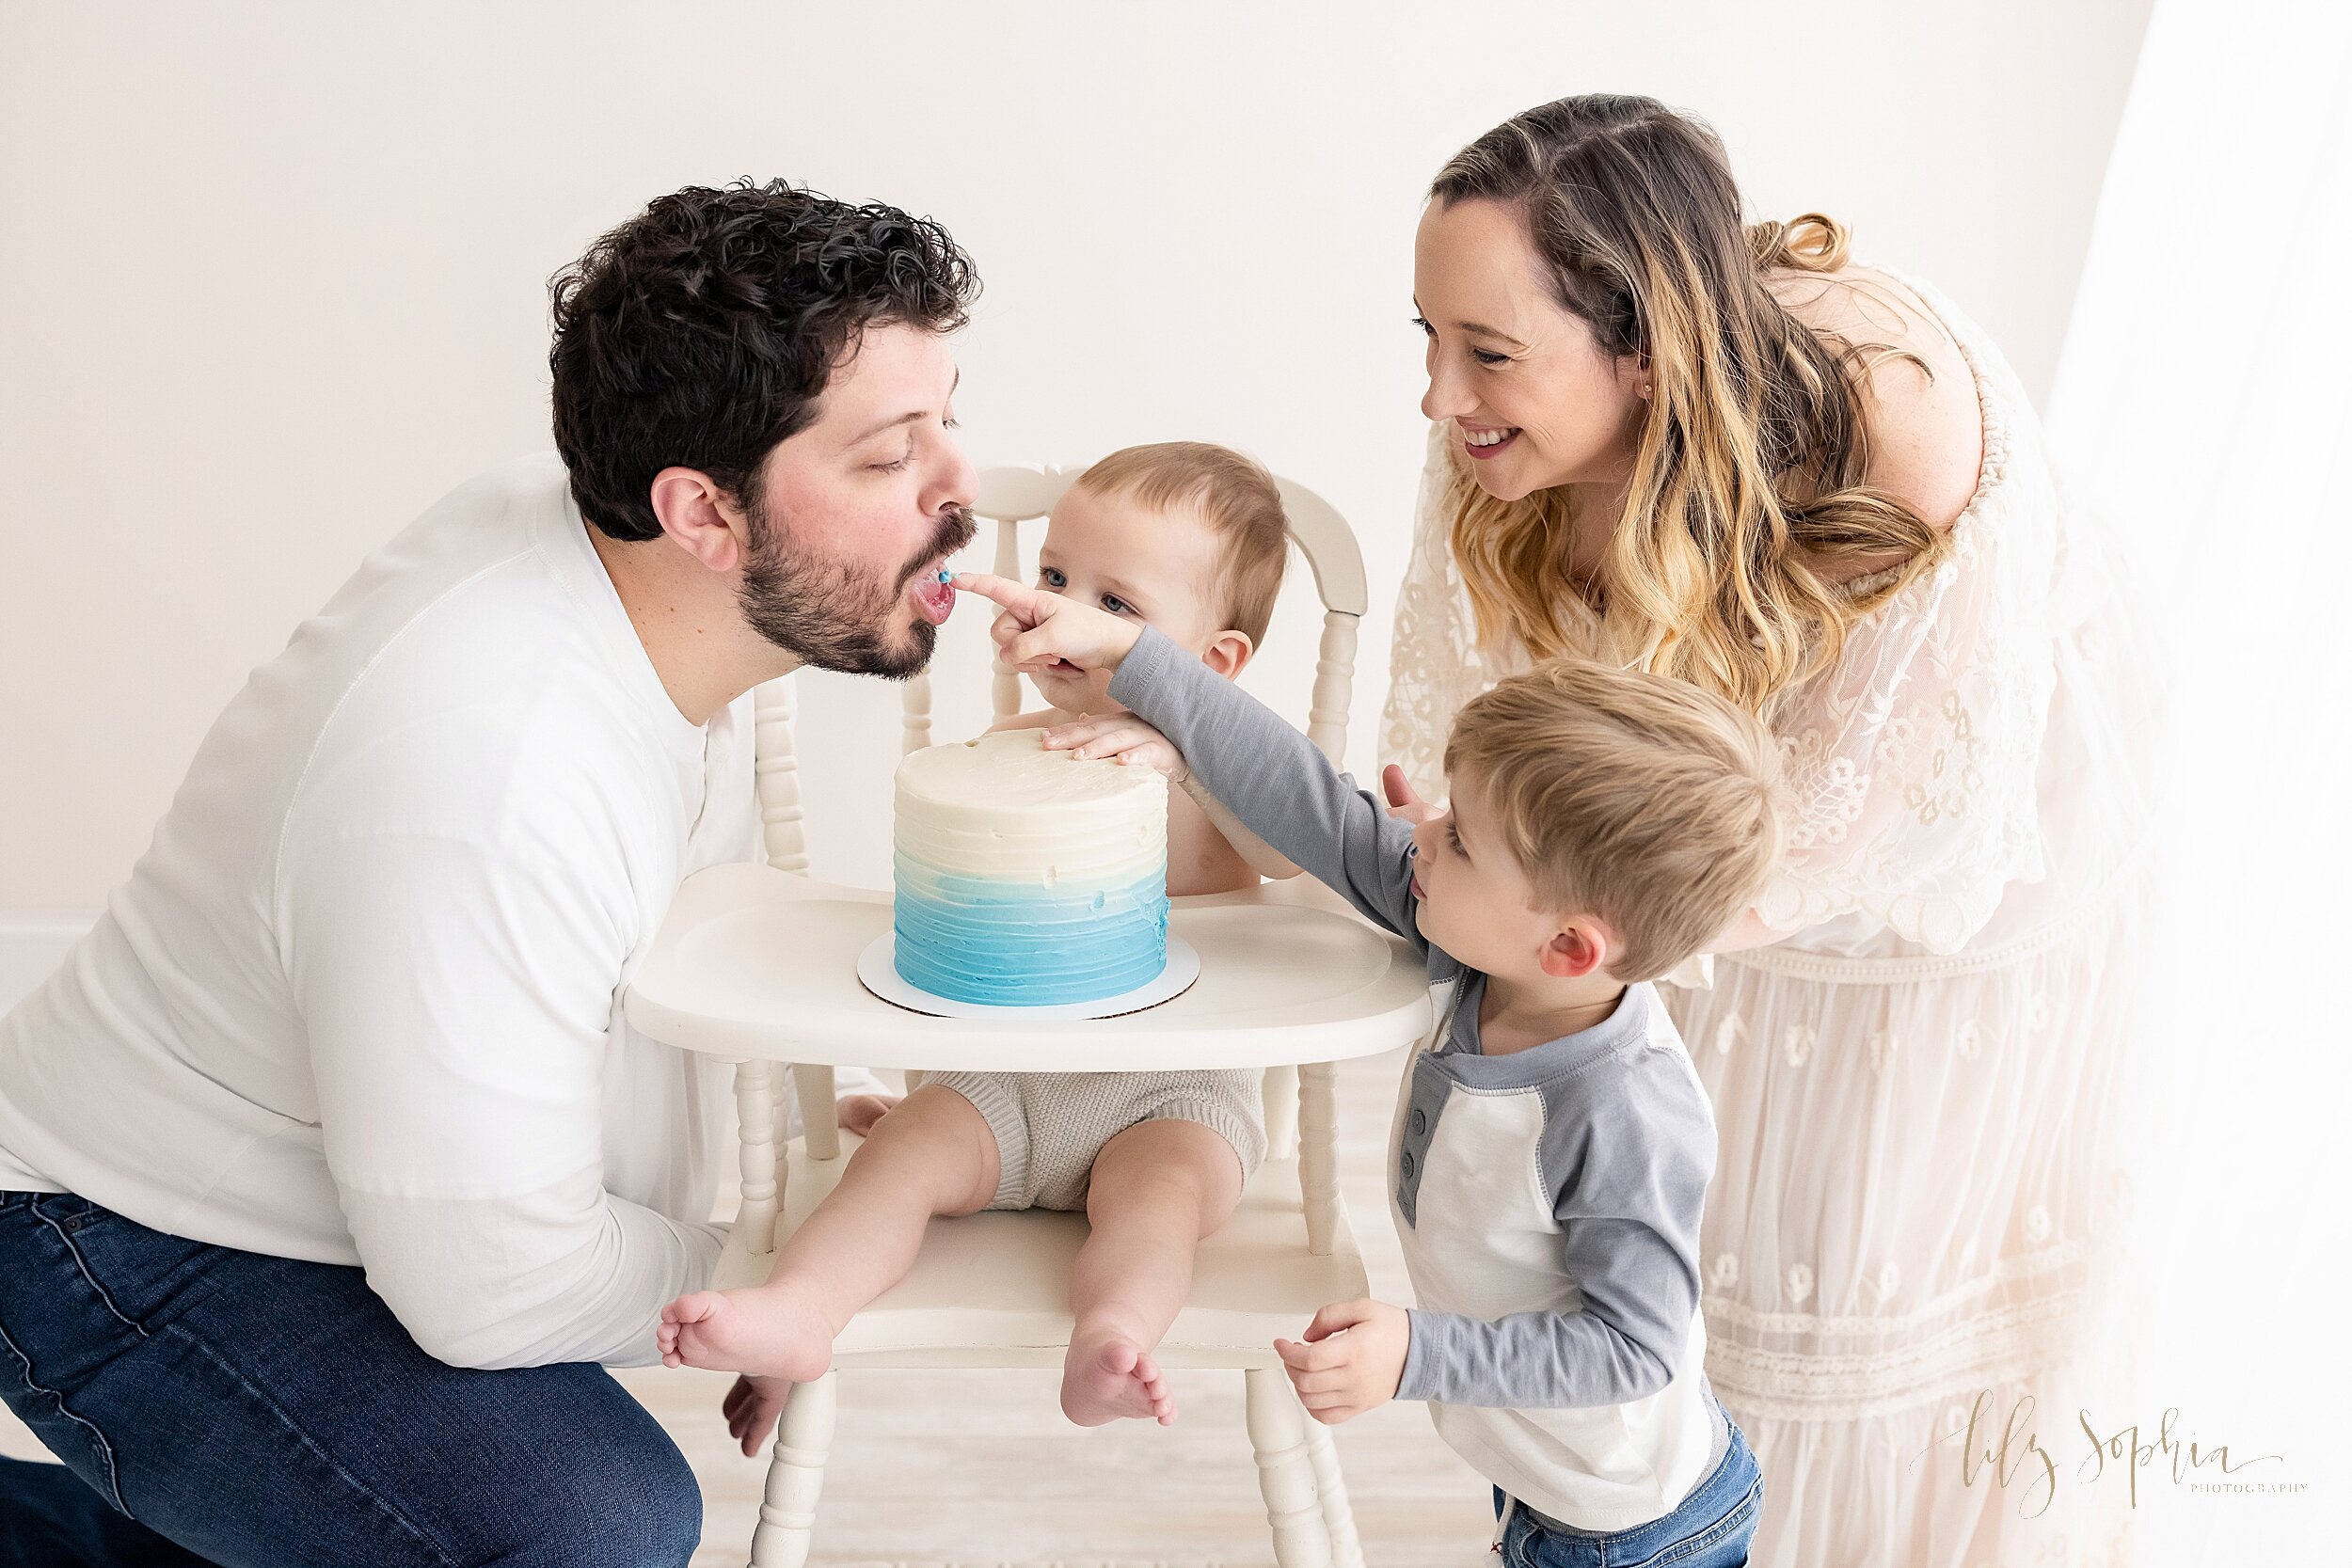  Family photo of the first birthday of little boy who is sitting with his cake on the tray of an antique high chair with his father on his left side and his mother and toddler brother on his right side as his toddler brother sticks his finger with ic